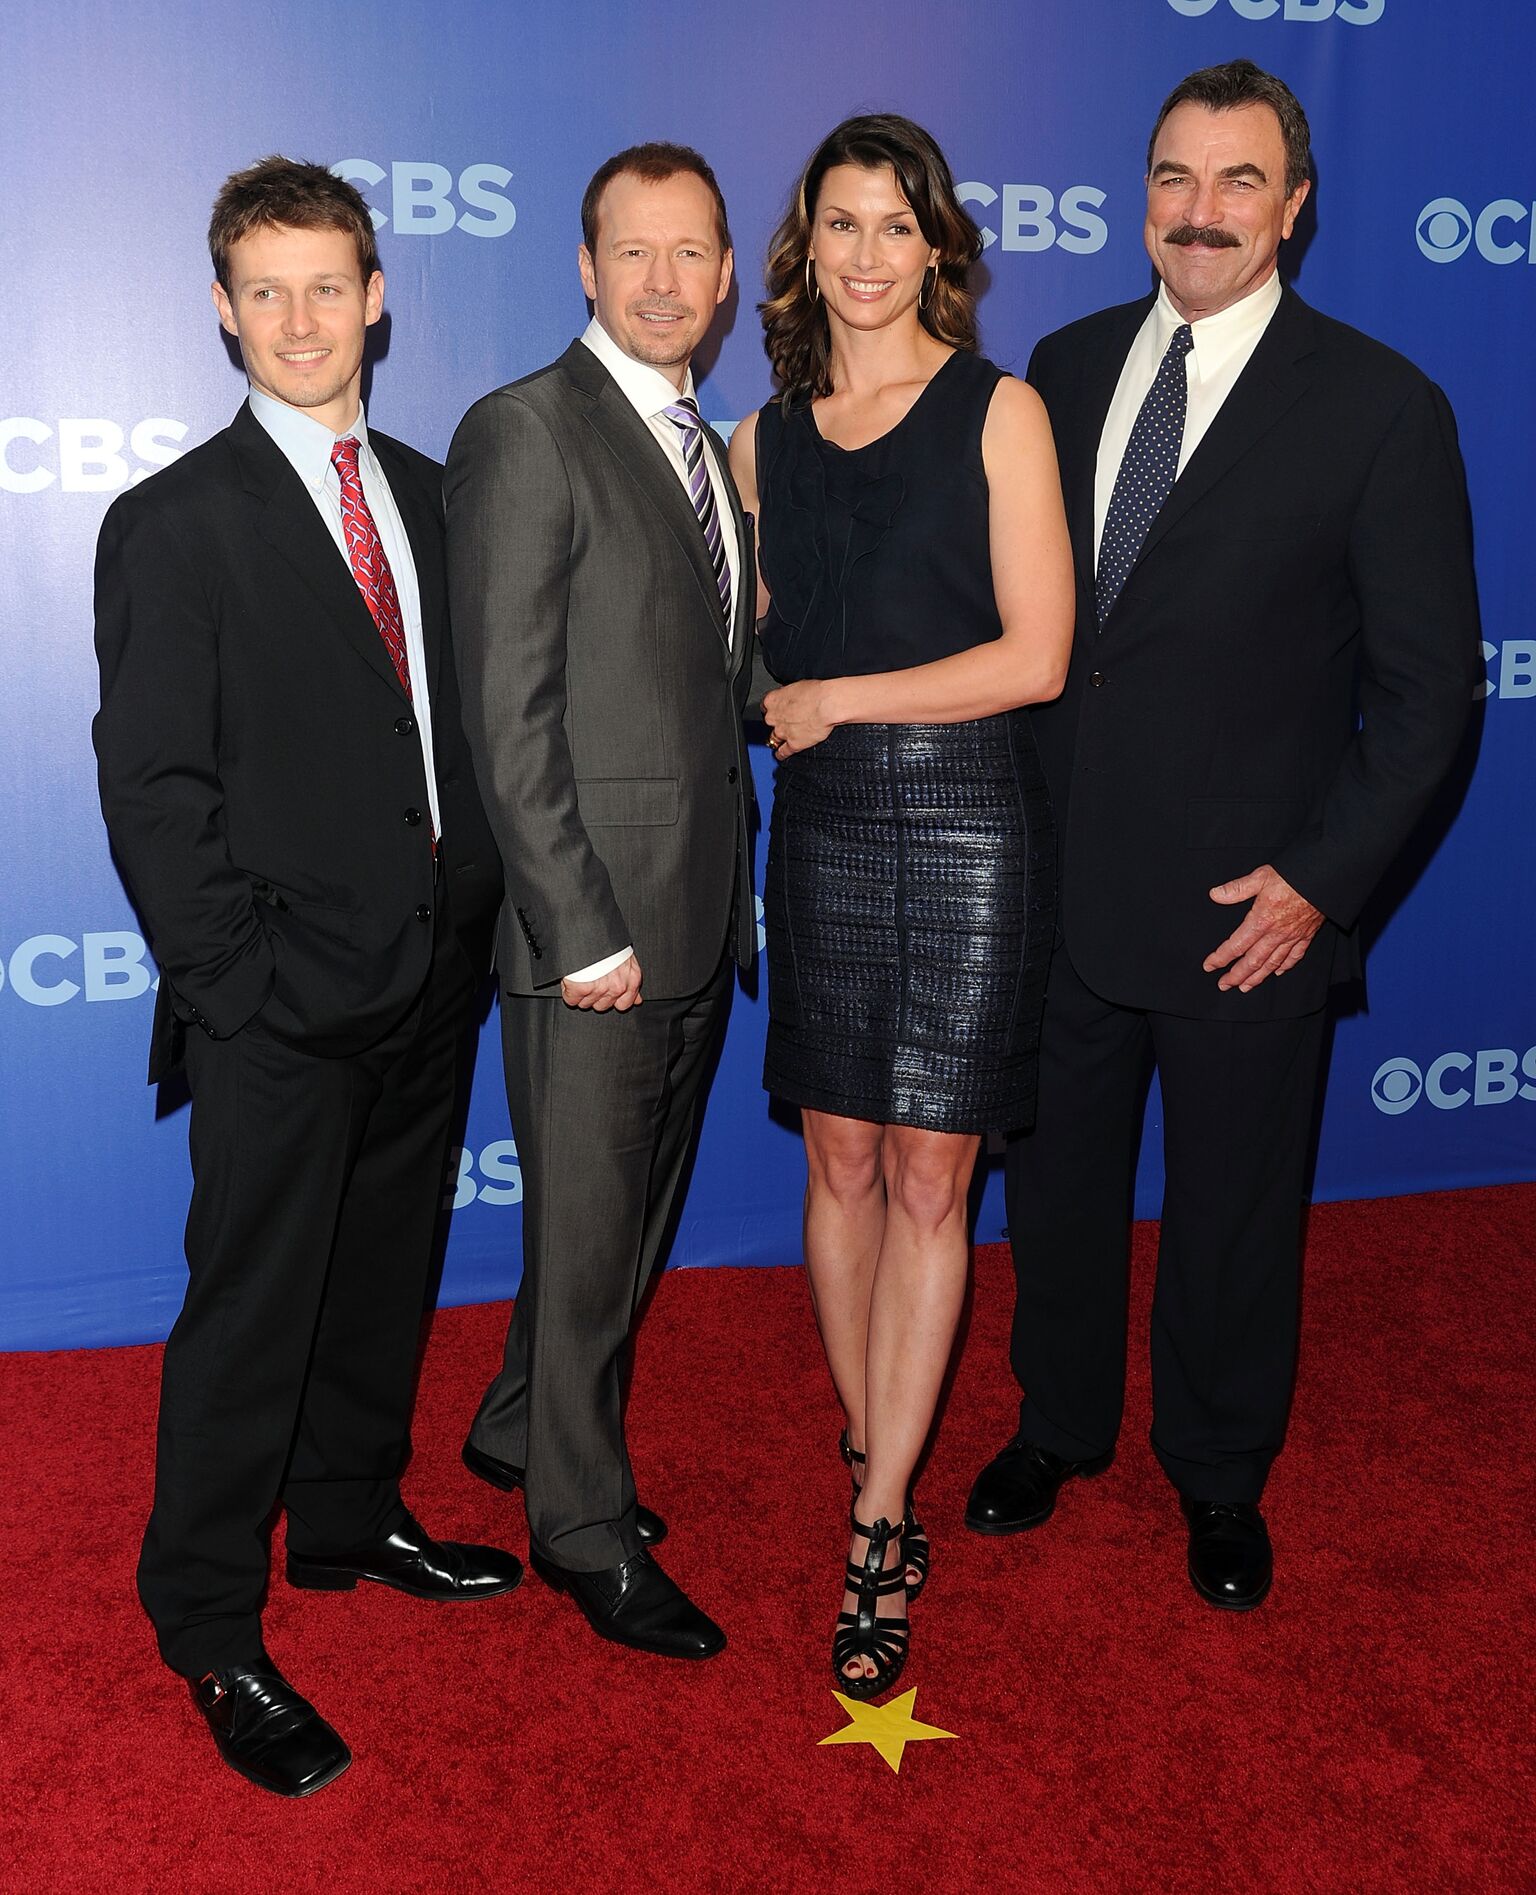 The cast of "Blue Bloods" attend the 2010 CBS UpFront | Getty Images